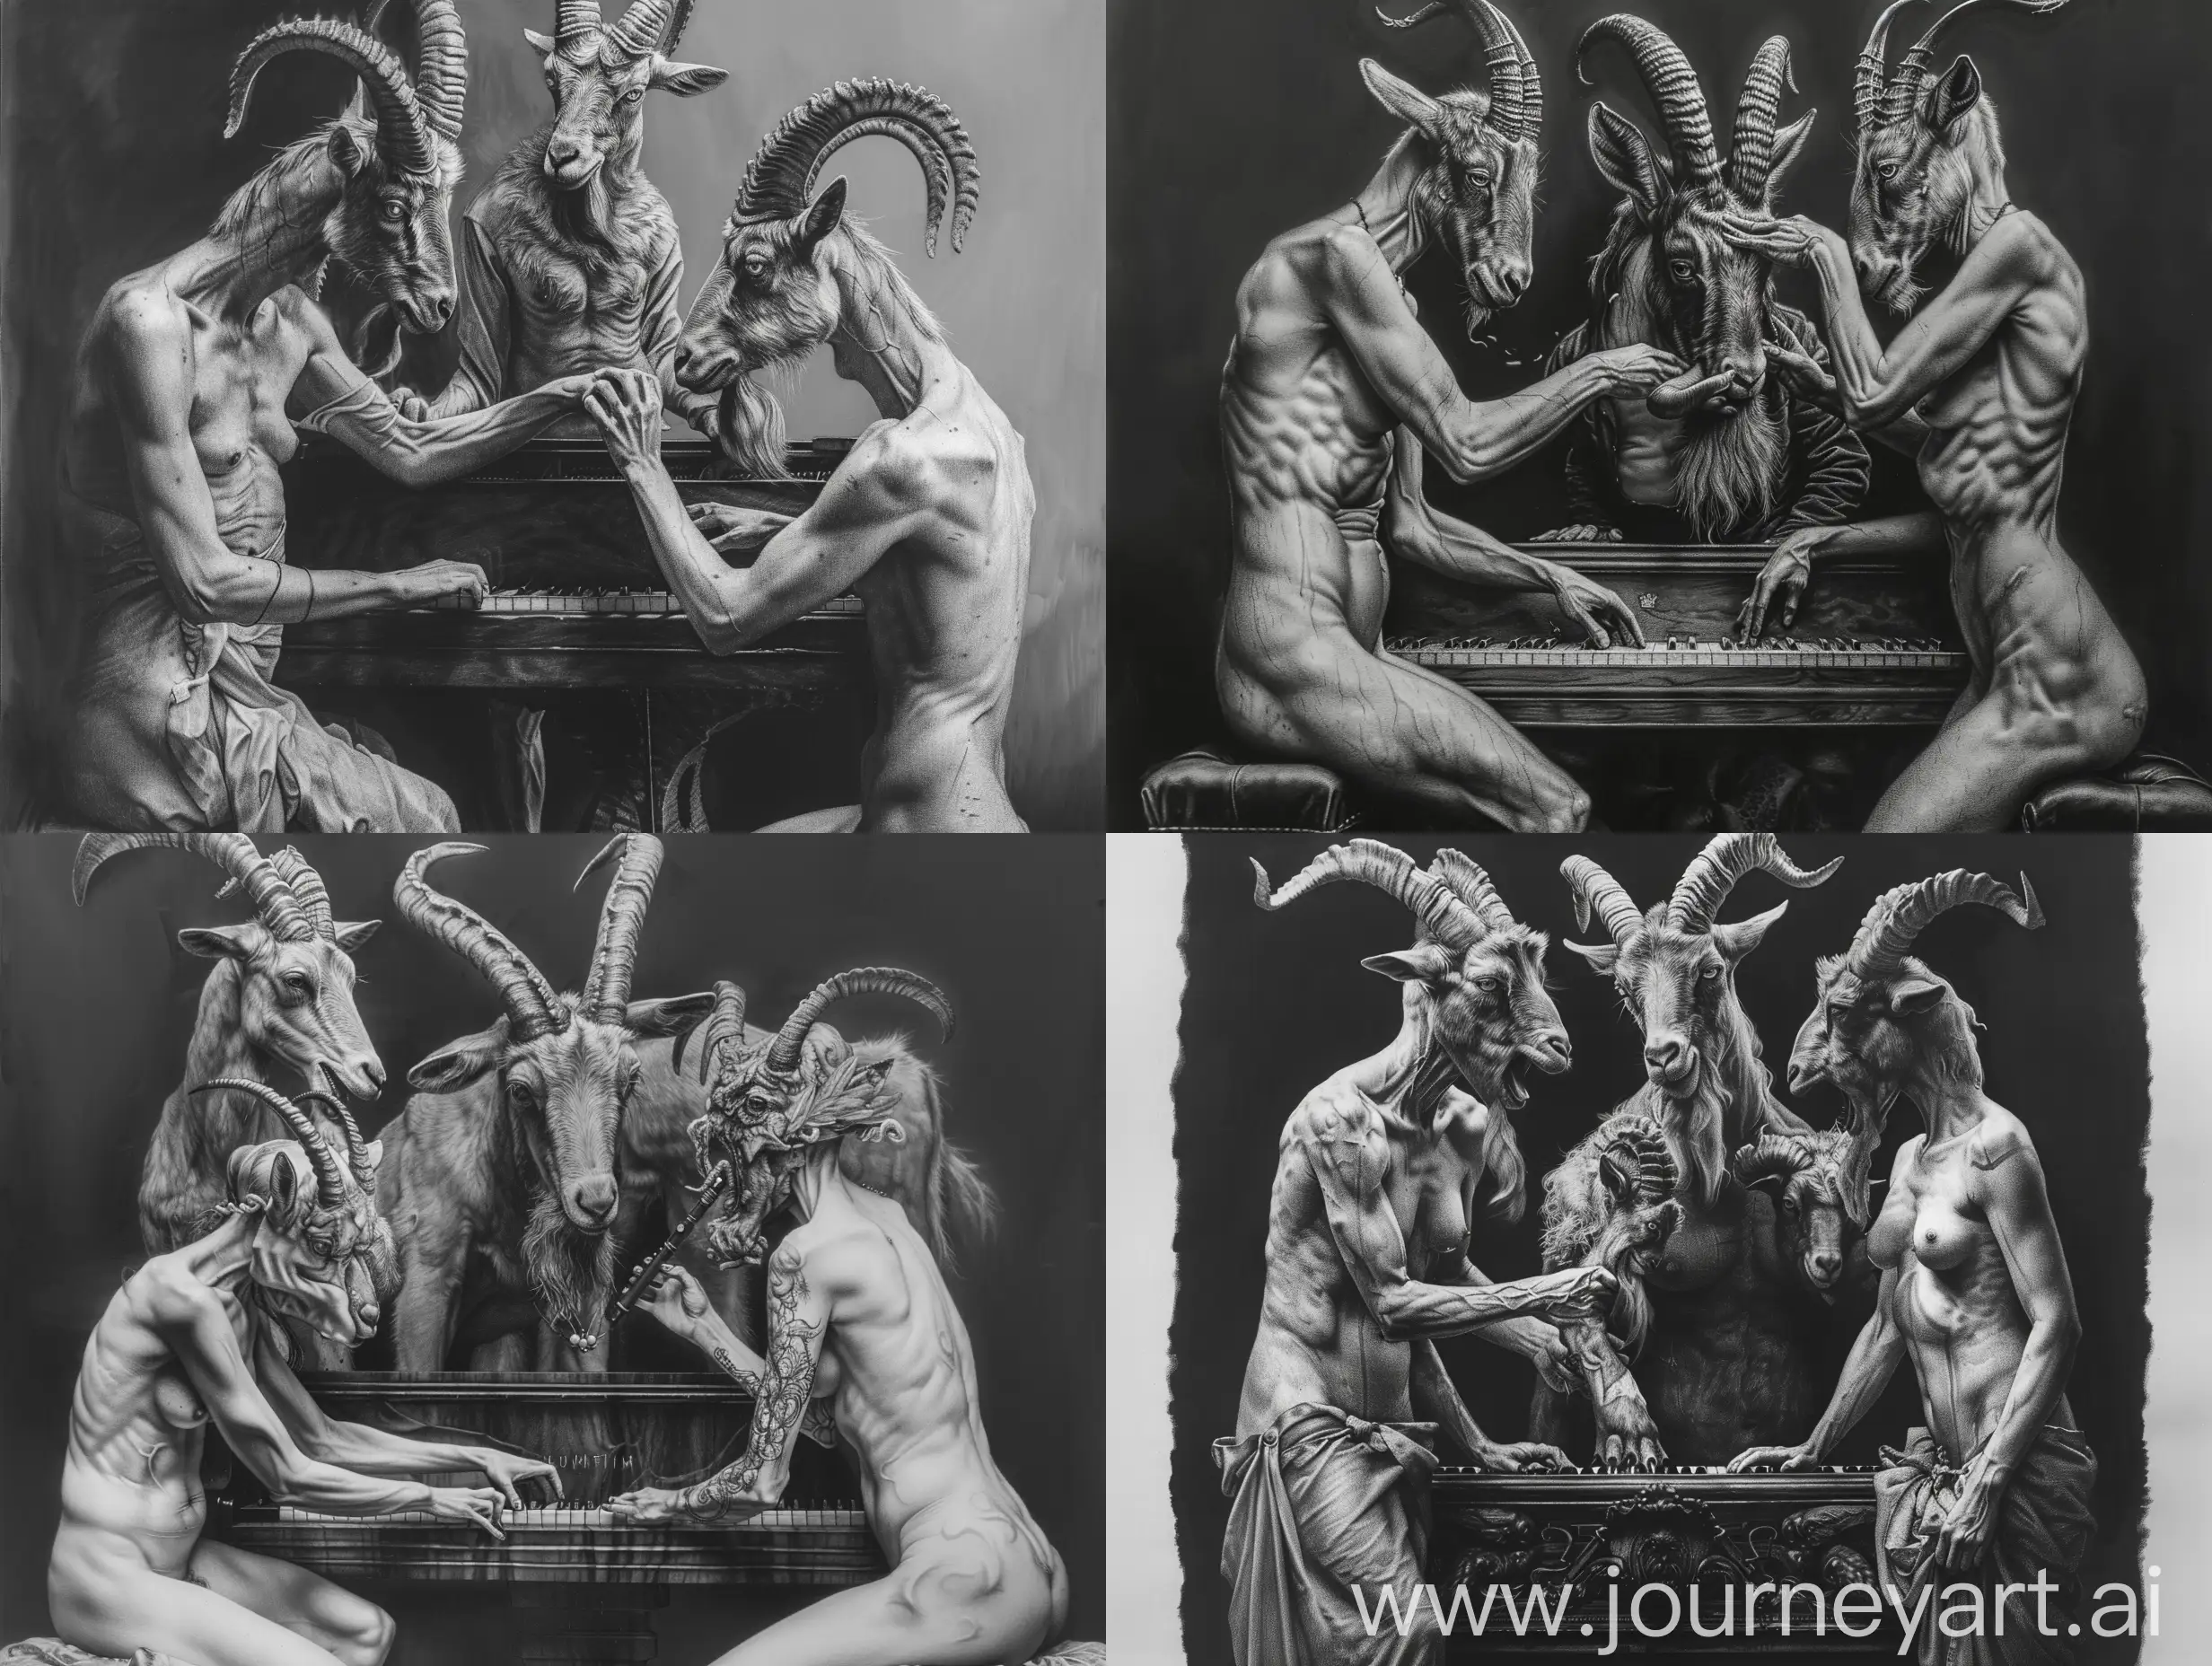 creative dark hyper realistic pencil sketch of three mythological figures with animal heads, each showing reverence towards the central goat-headed figure in a surreal setting playing piano, large canvas in great details